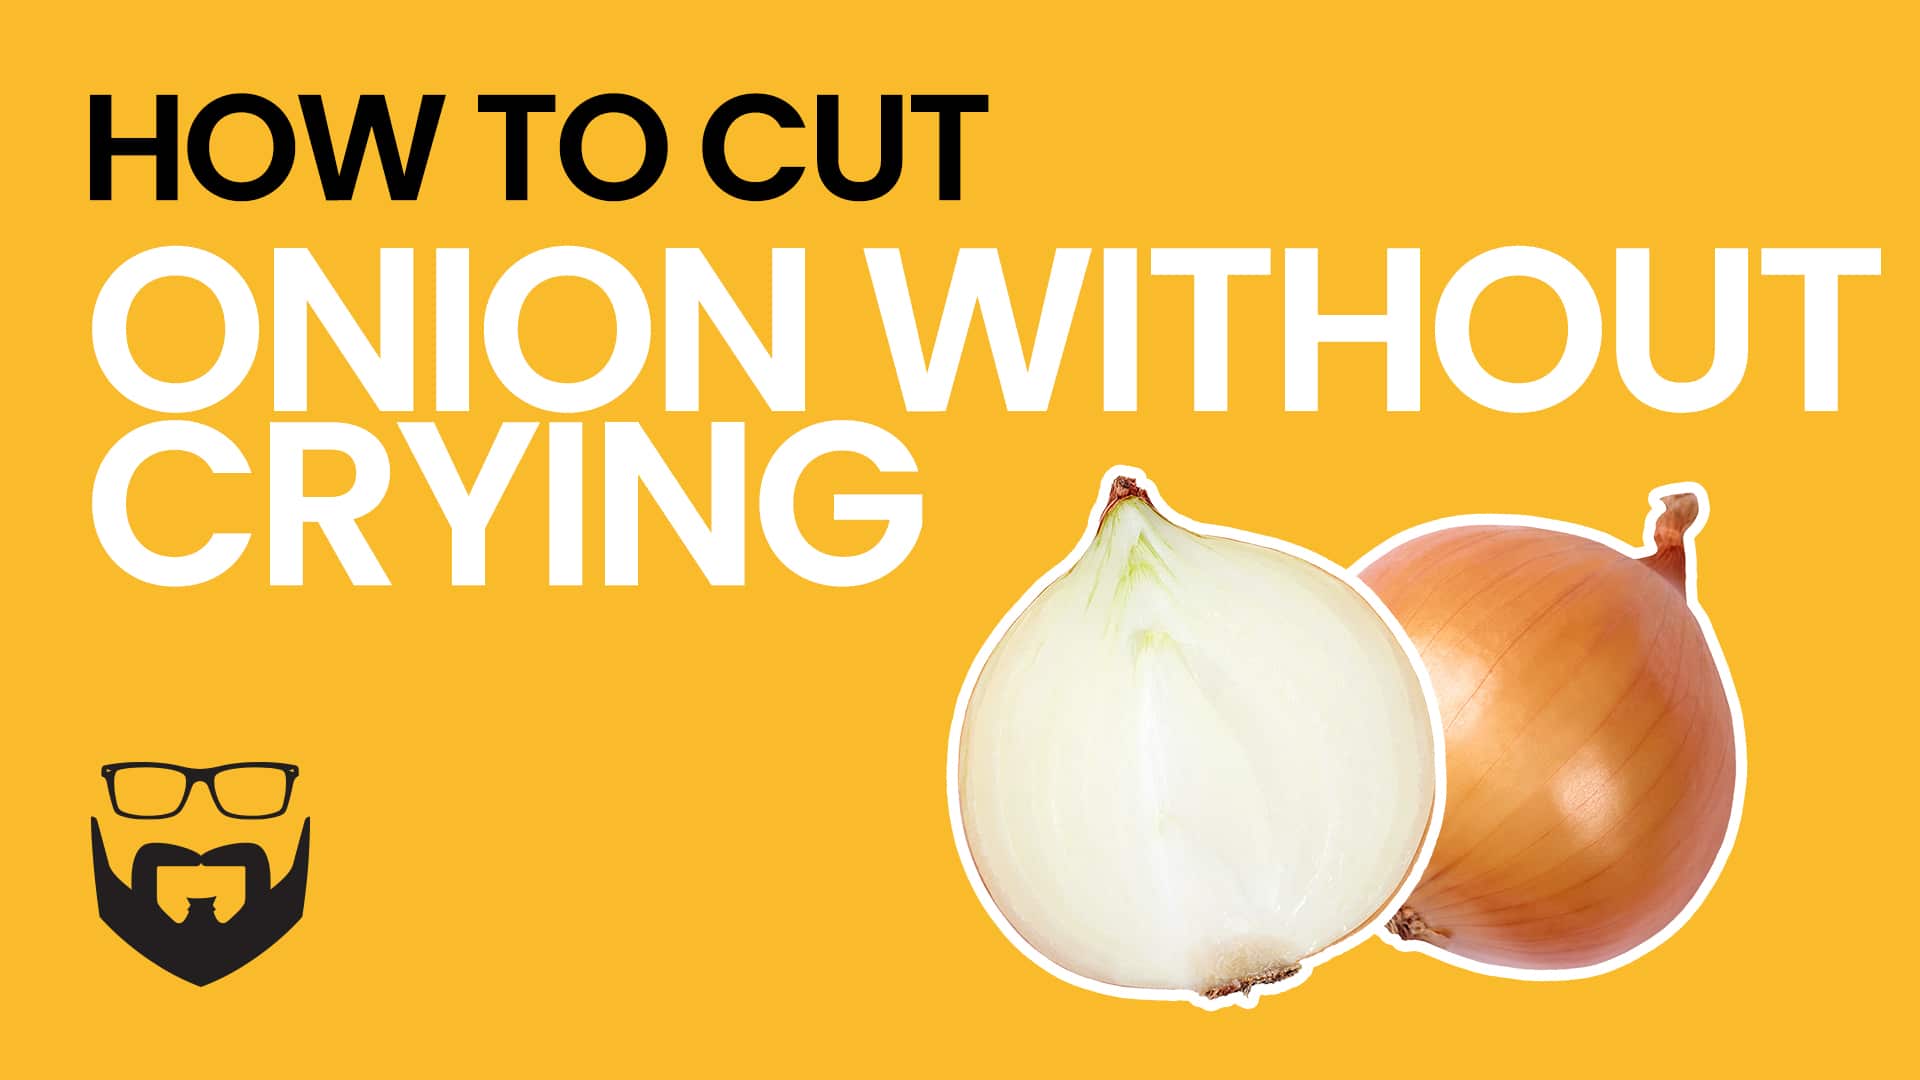 How to Cut Onion Without Crying Video - Yellow